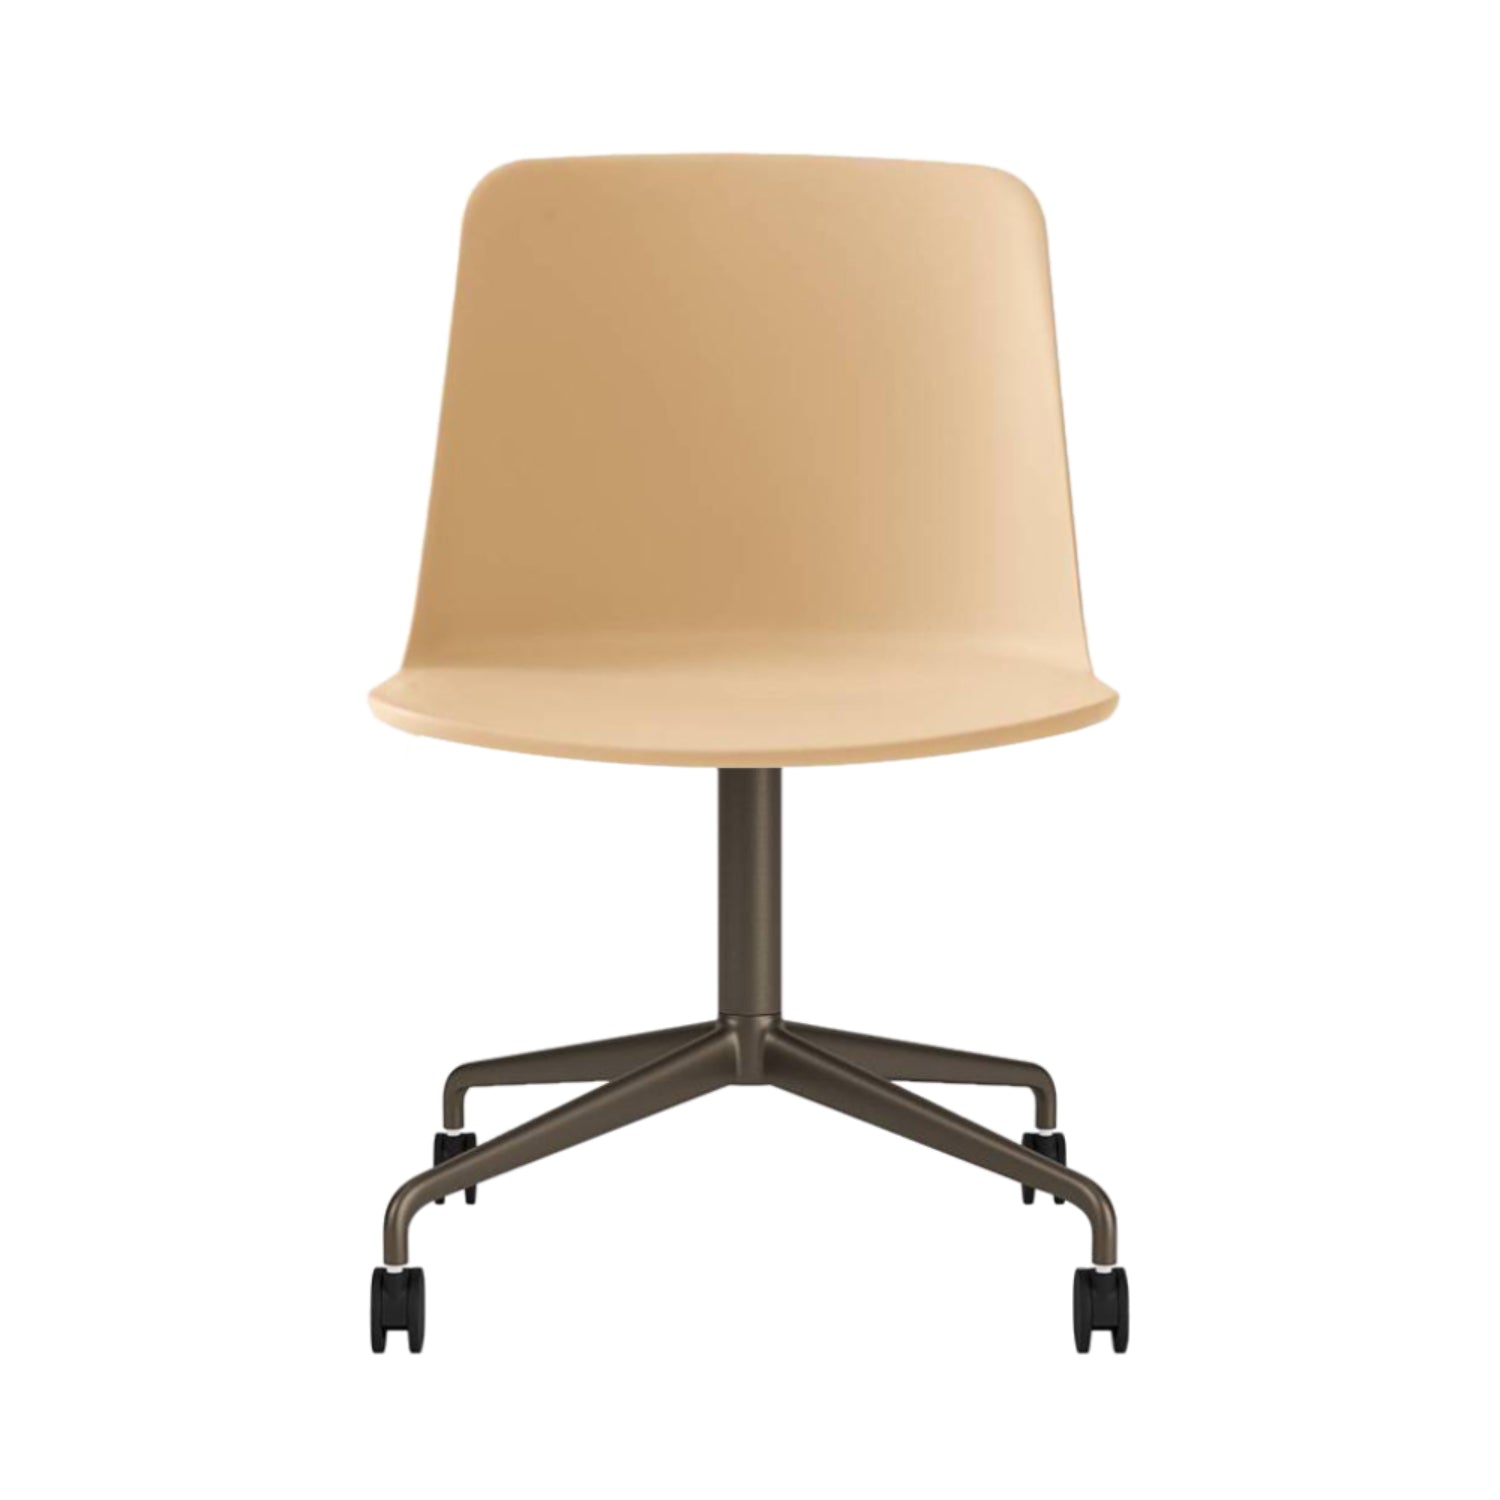 Rely Chair HW21: Beige Sand + Bronzed